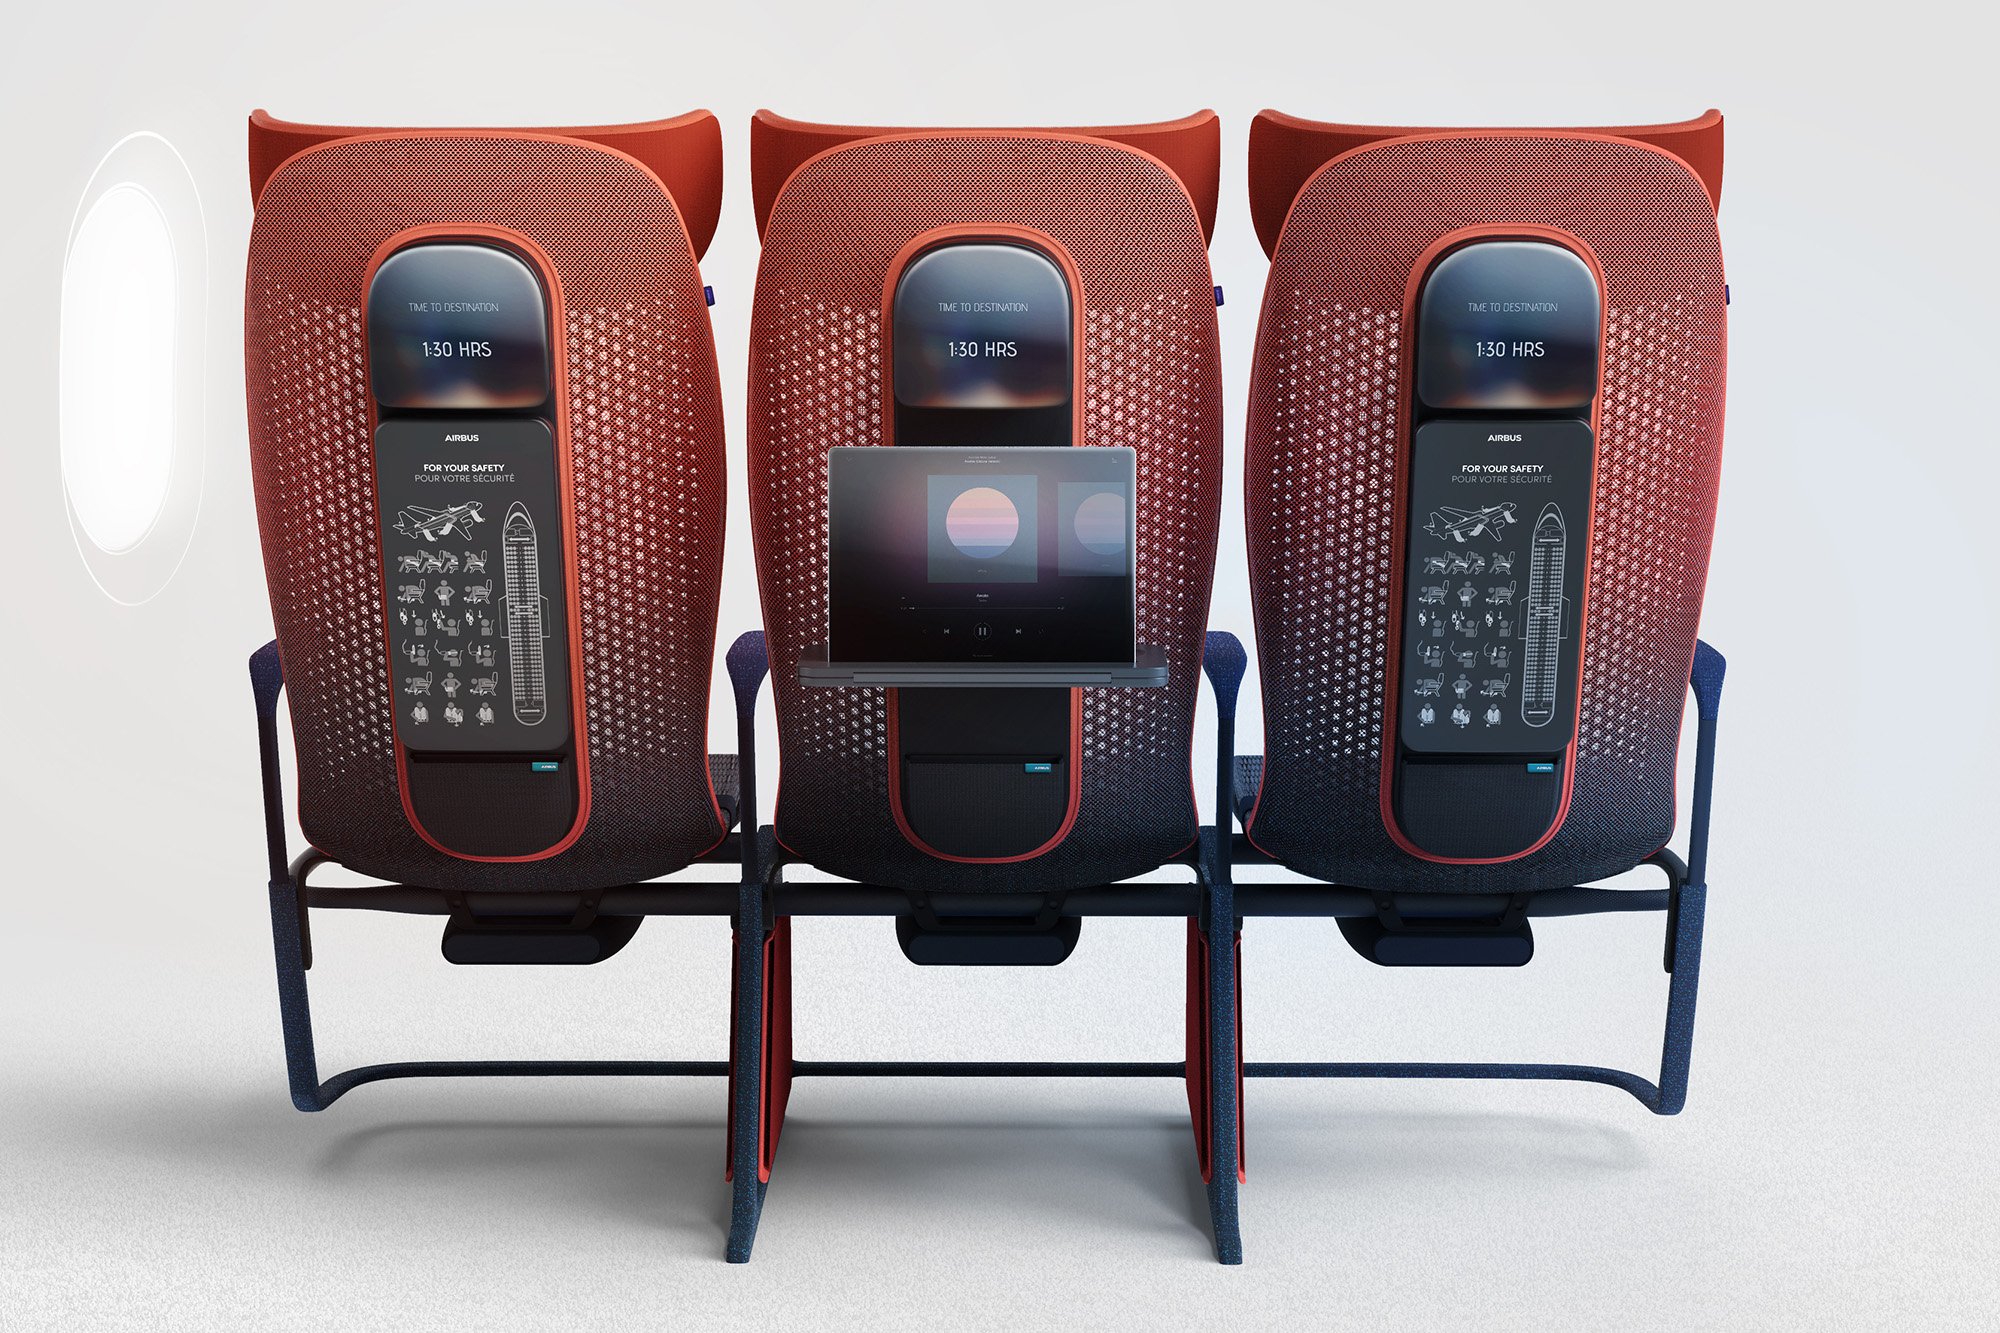 Move – a prototype of a new economy class seating for Airbus by design agency LAYER